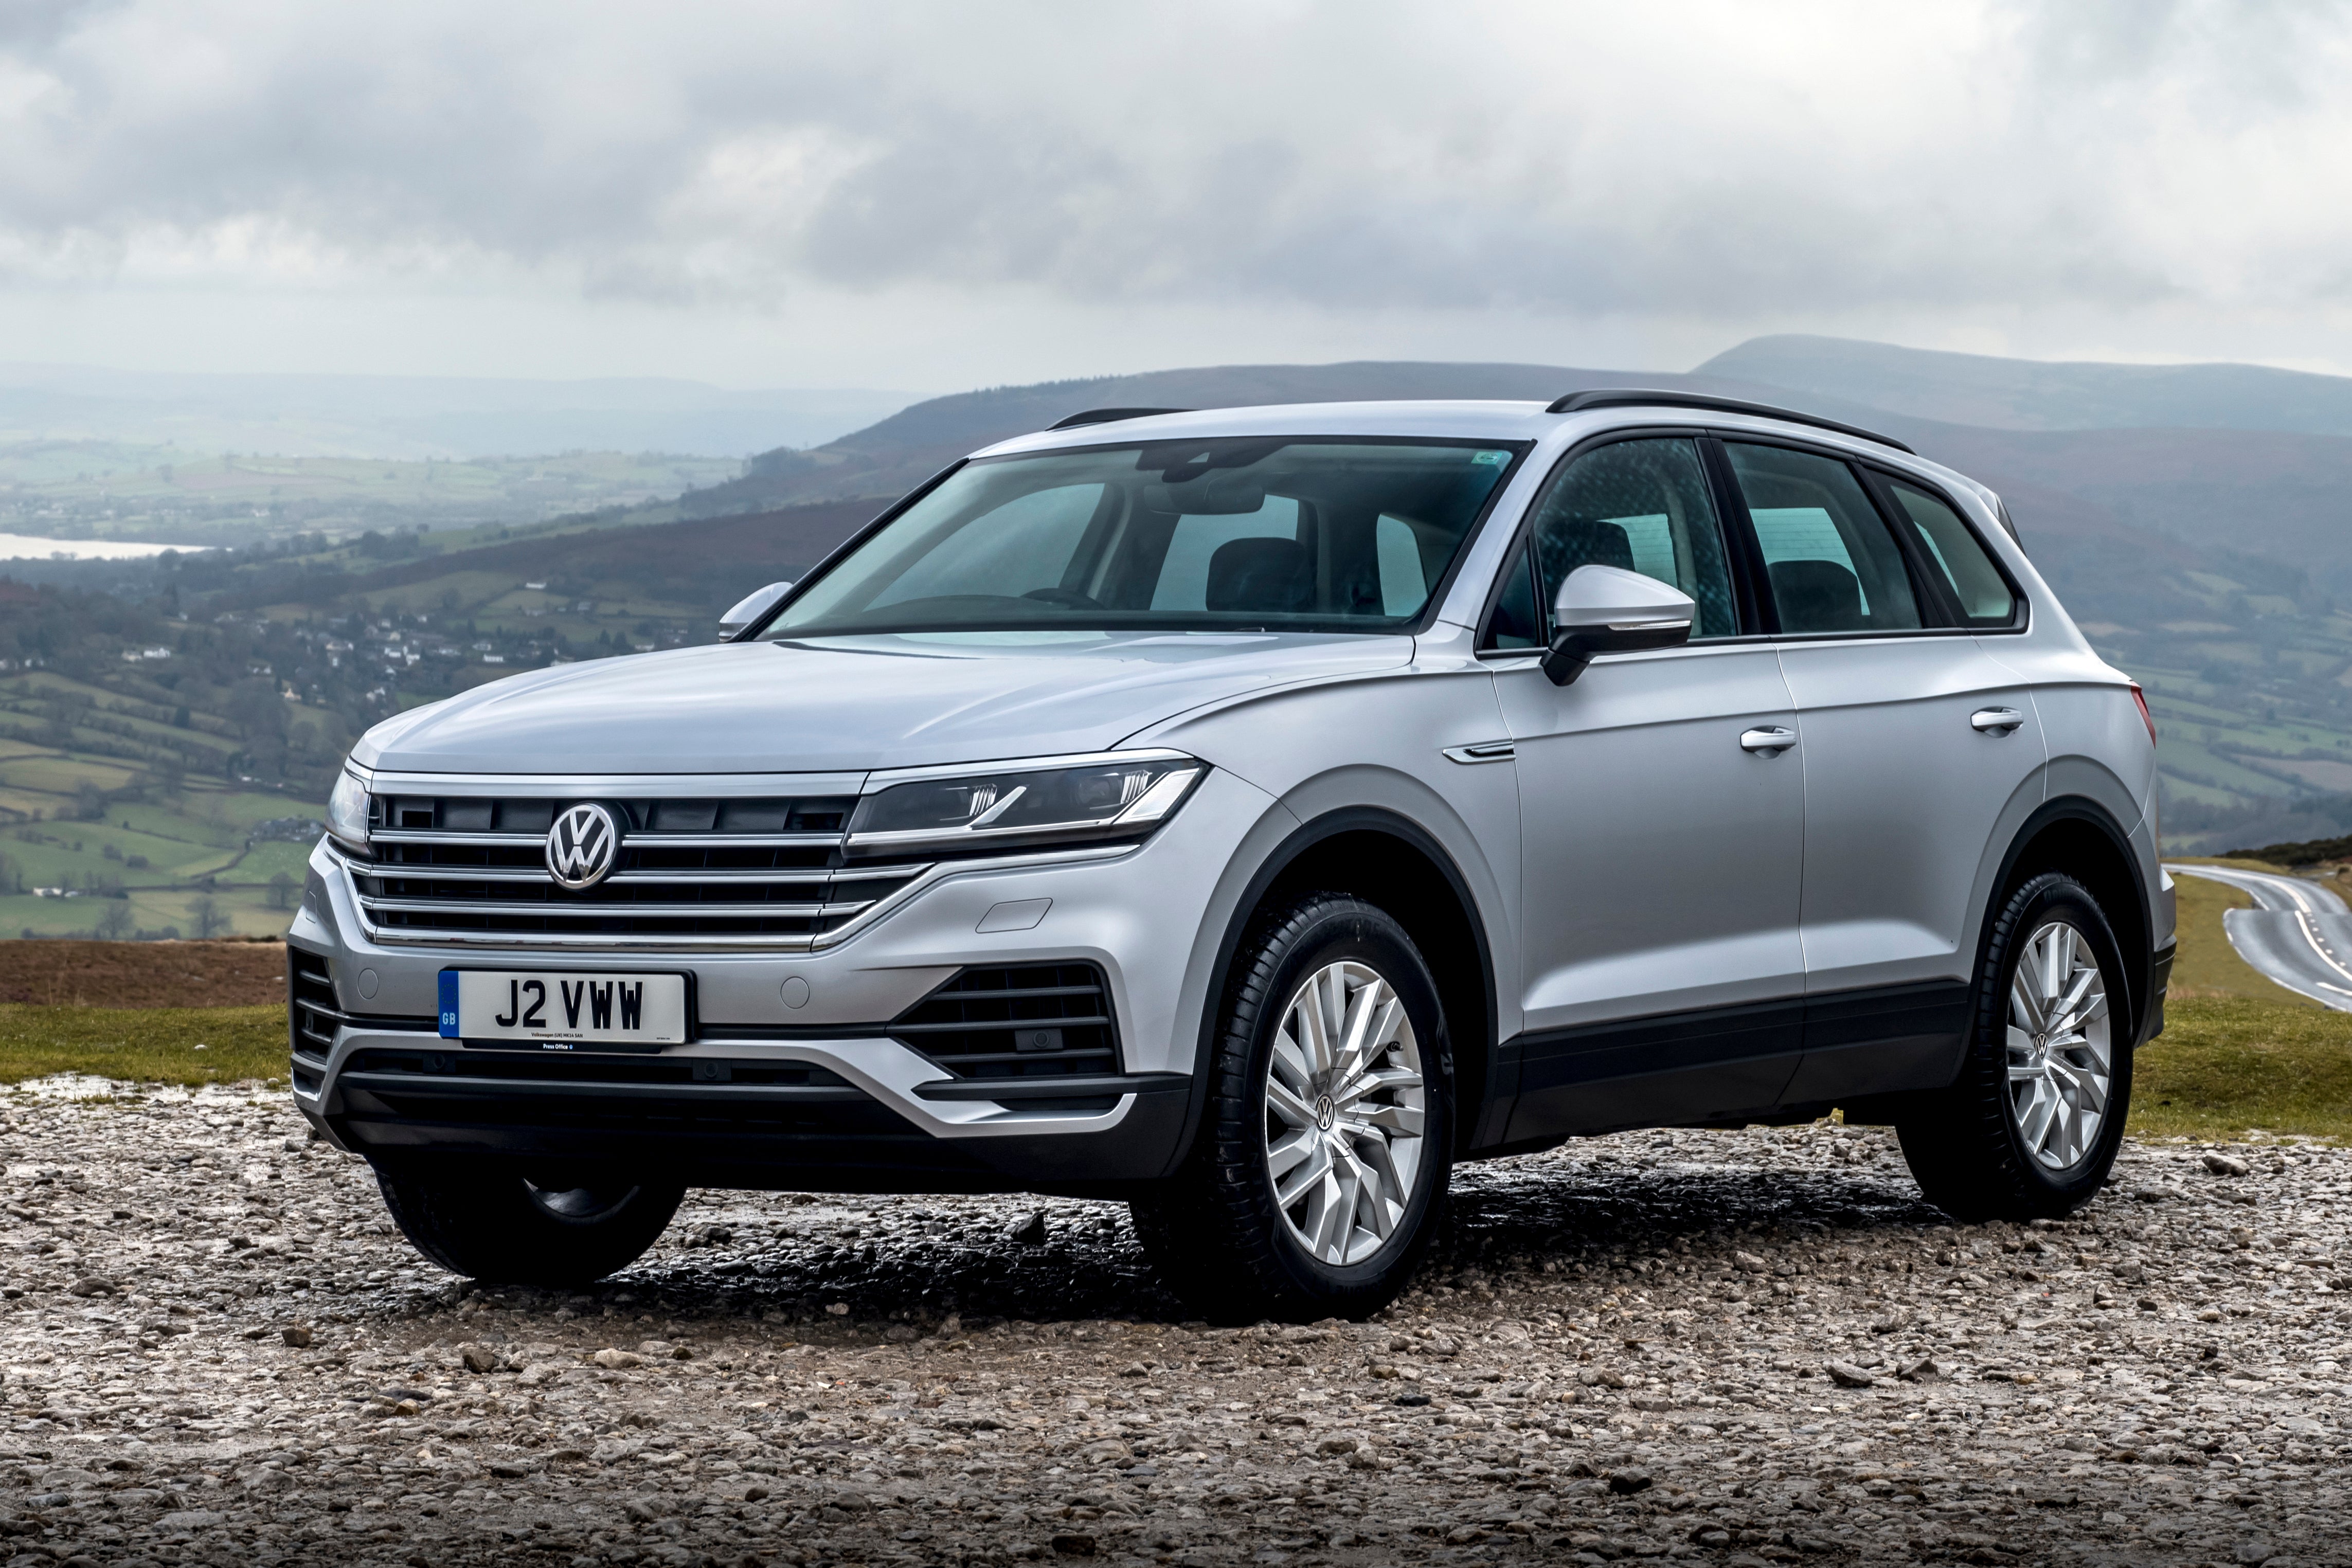 Volkswagen Touareg Review 2022: Front Side View